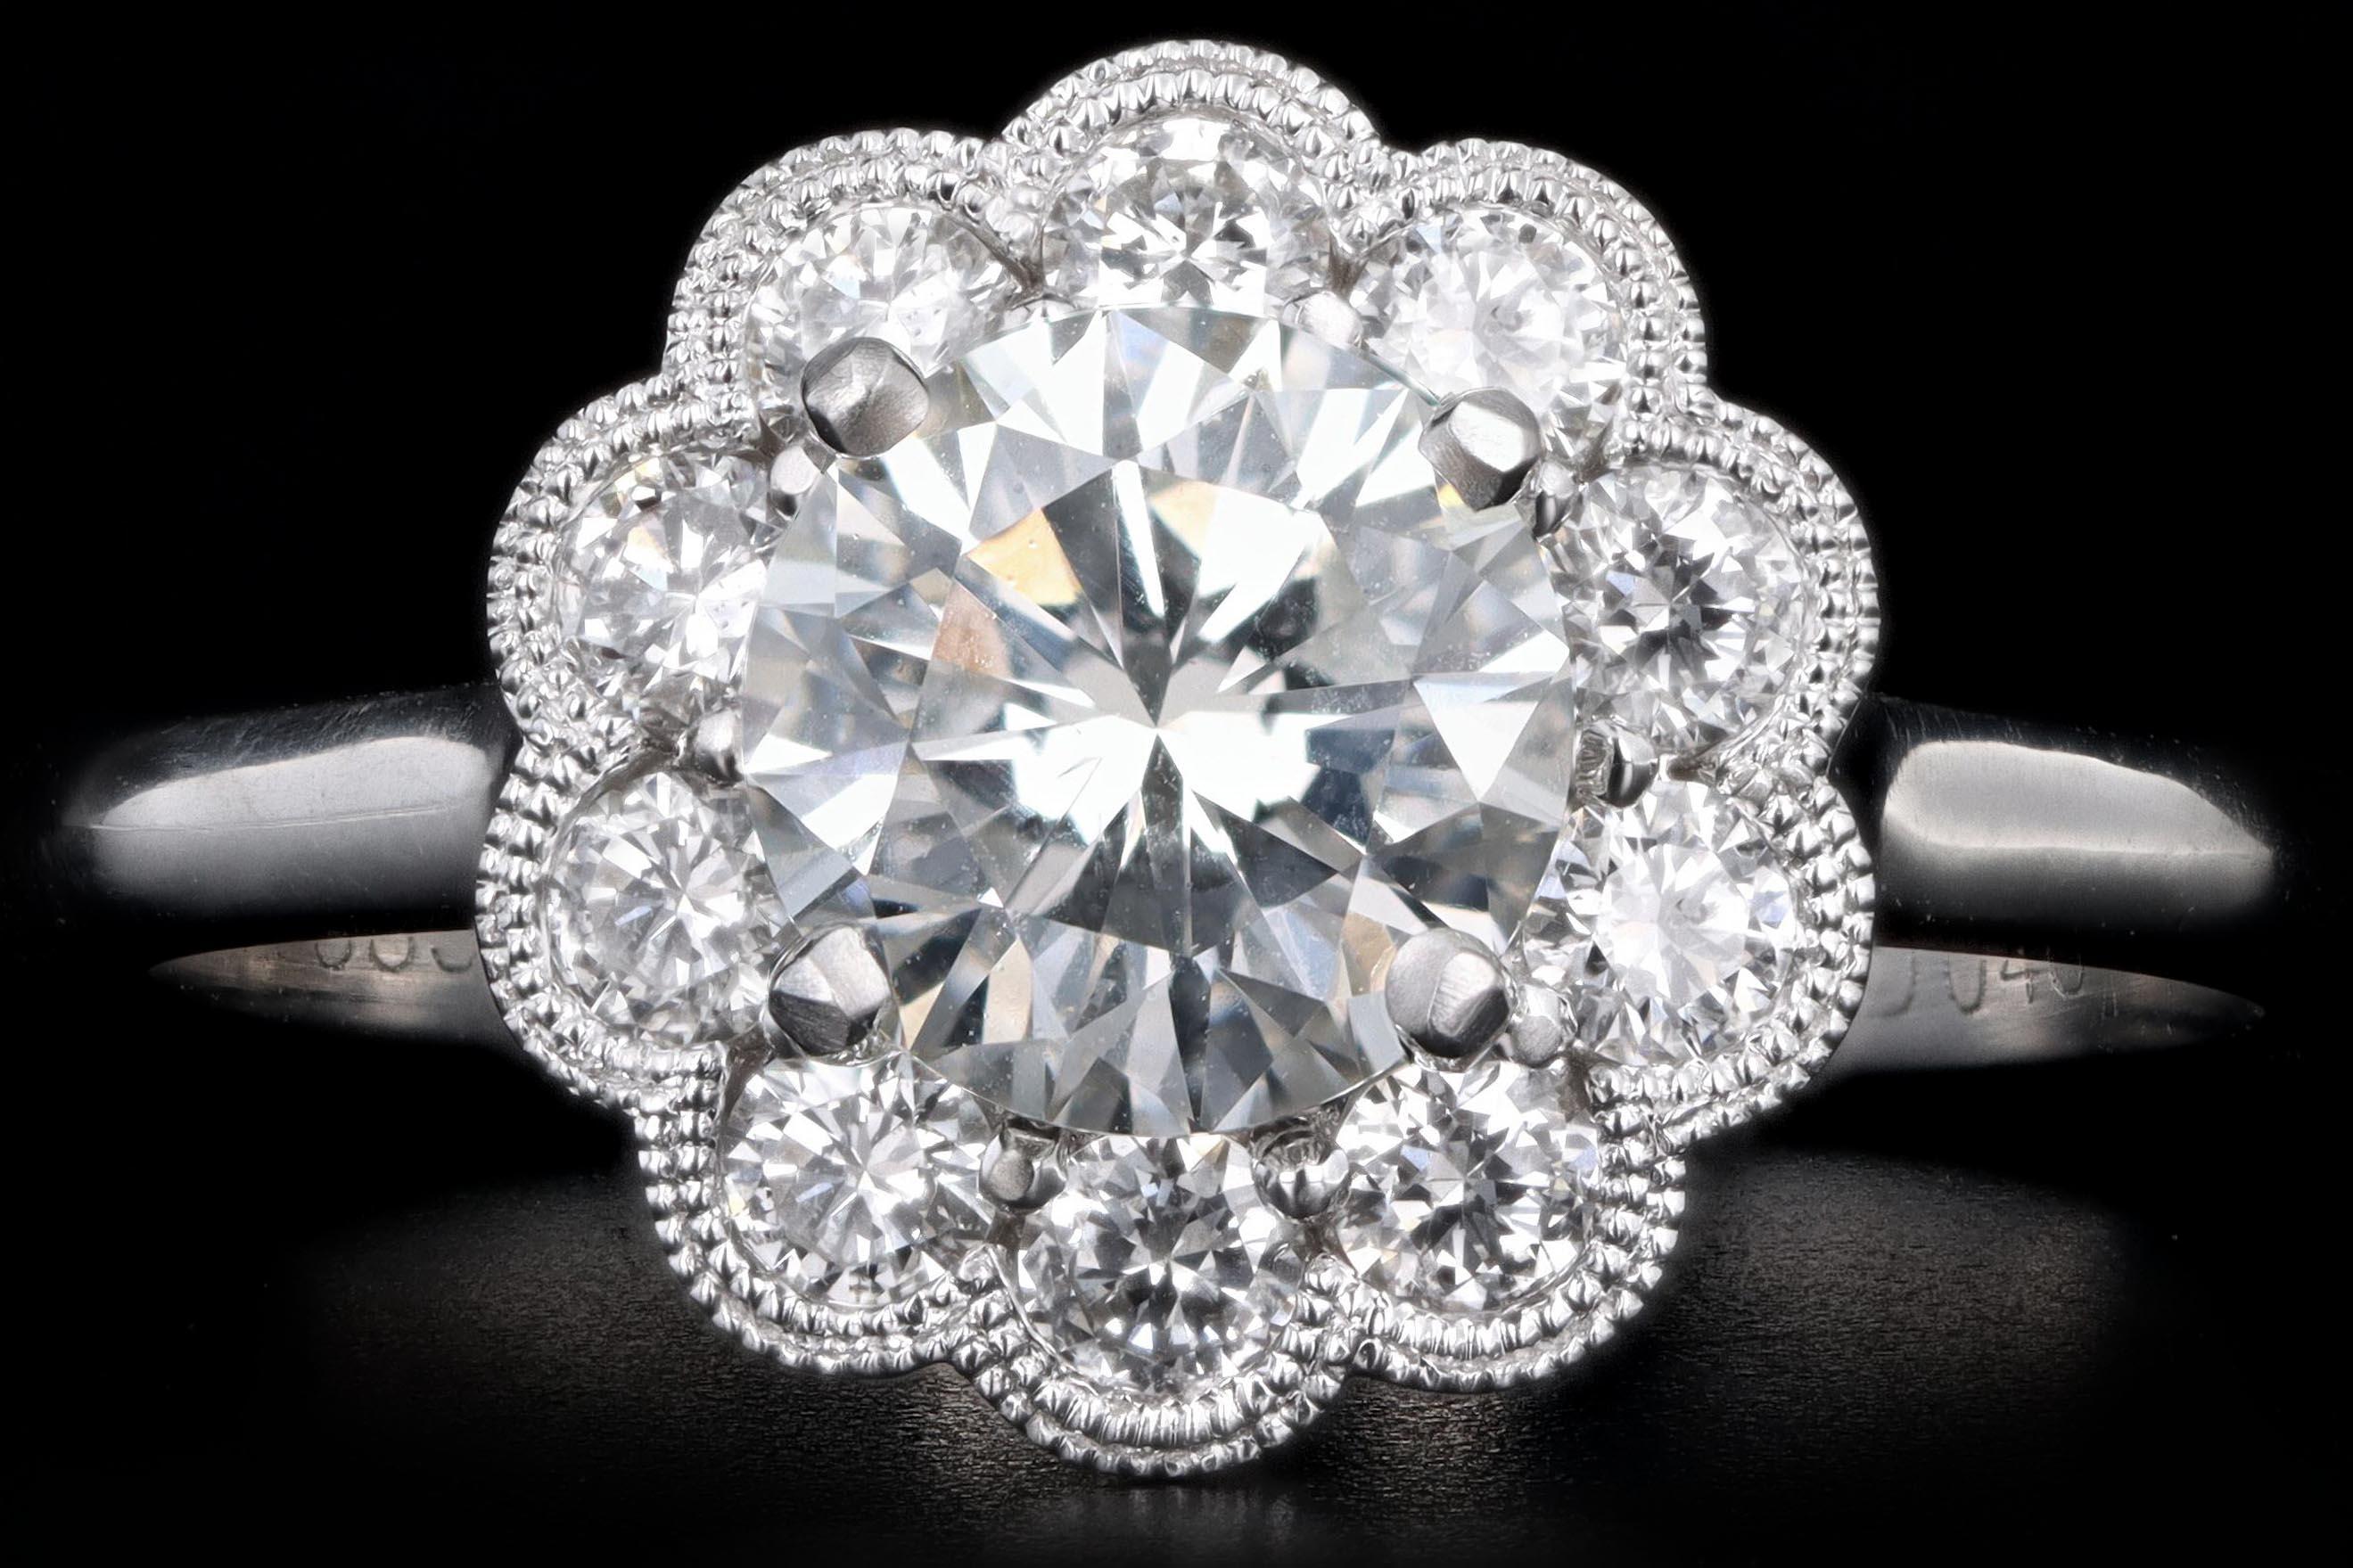 Era: Modern

Composition: 14K White Gold

Primary Stone: Round Brilliant Cut Diamond

Carat Weight: 1.13 Carats

Color/Clarity: E / SI1

GIA Report Number: 10041943

Accent Stone: Round Brilliant Diamonds 

Carat Weight: Approximately .2 Carats